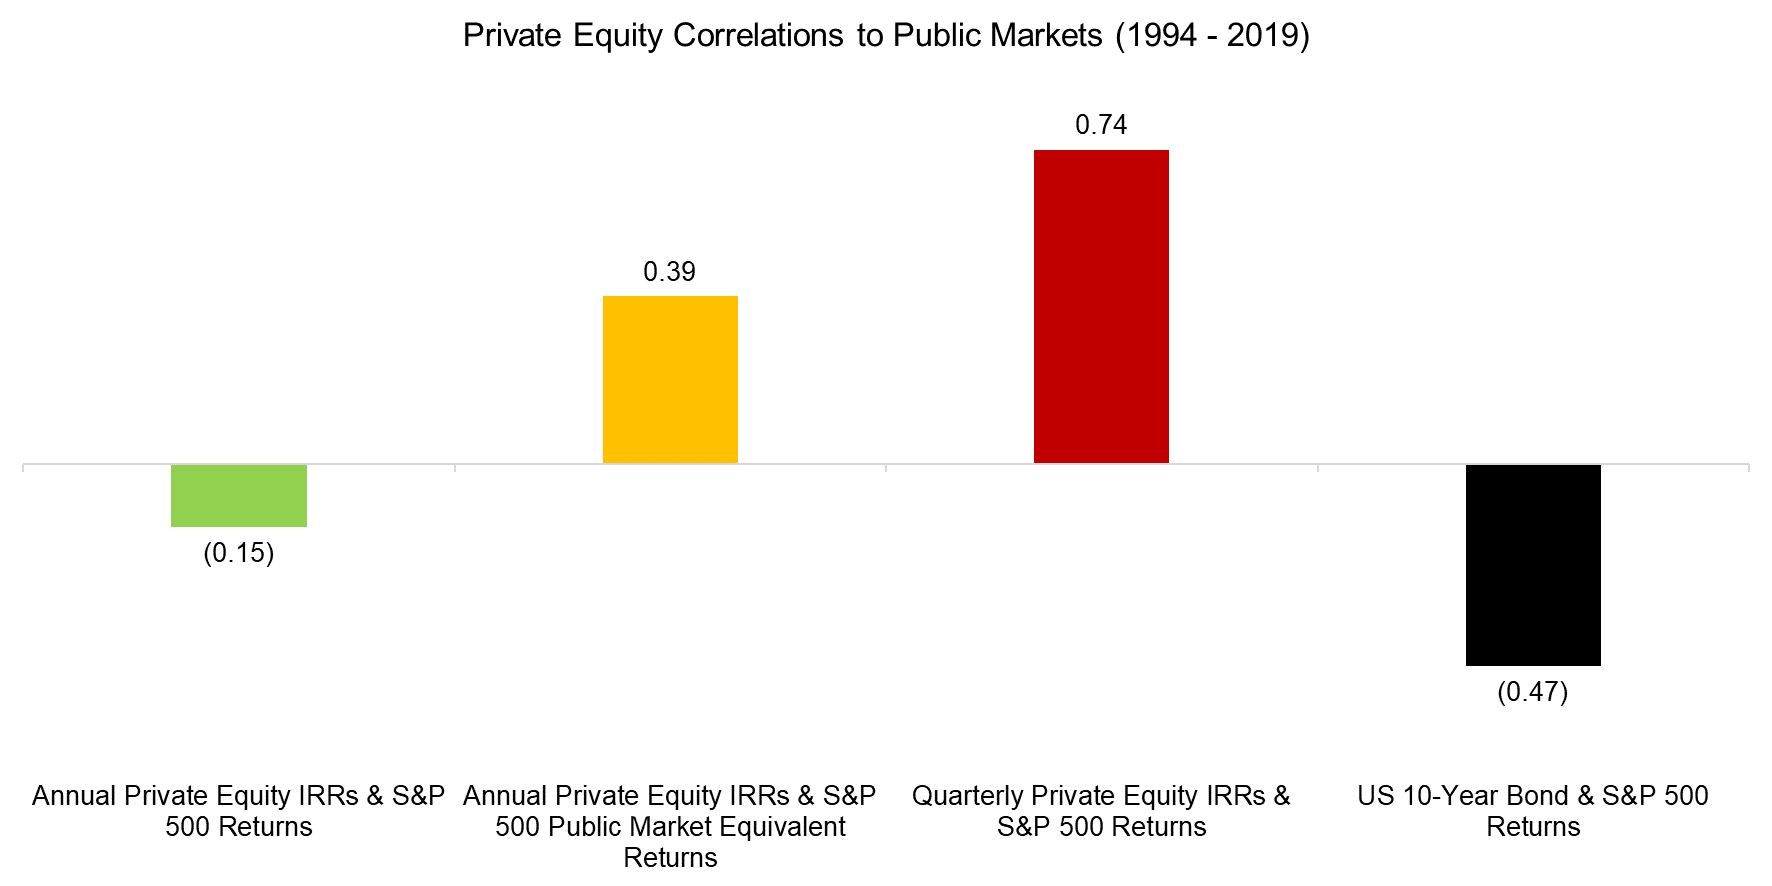 Private Equity Correlations to Public Markets (1994 - 2019)